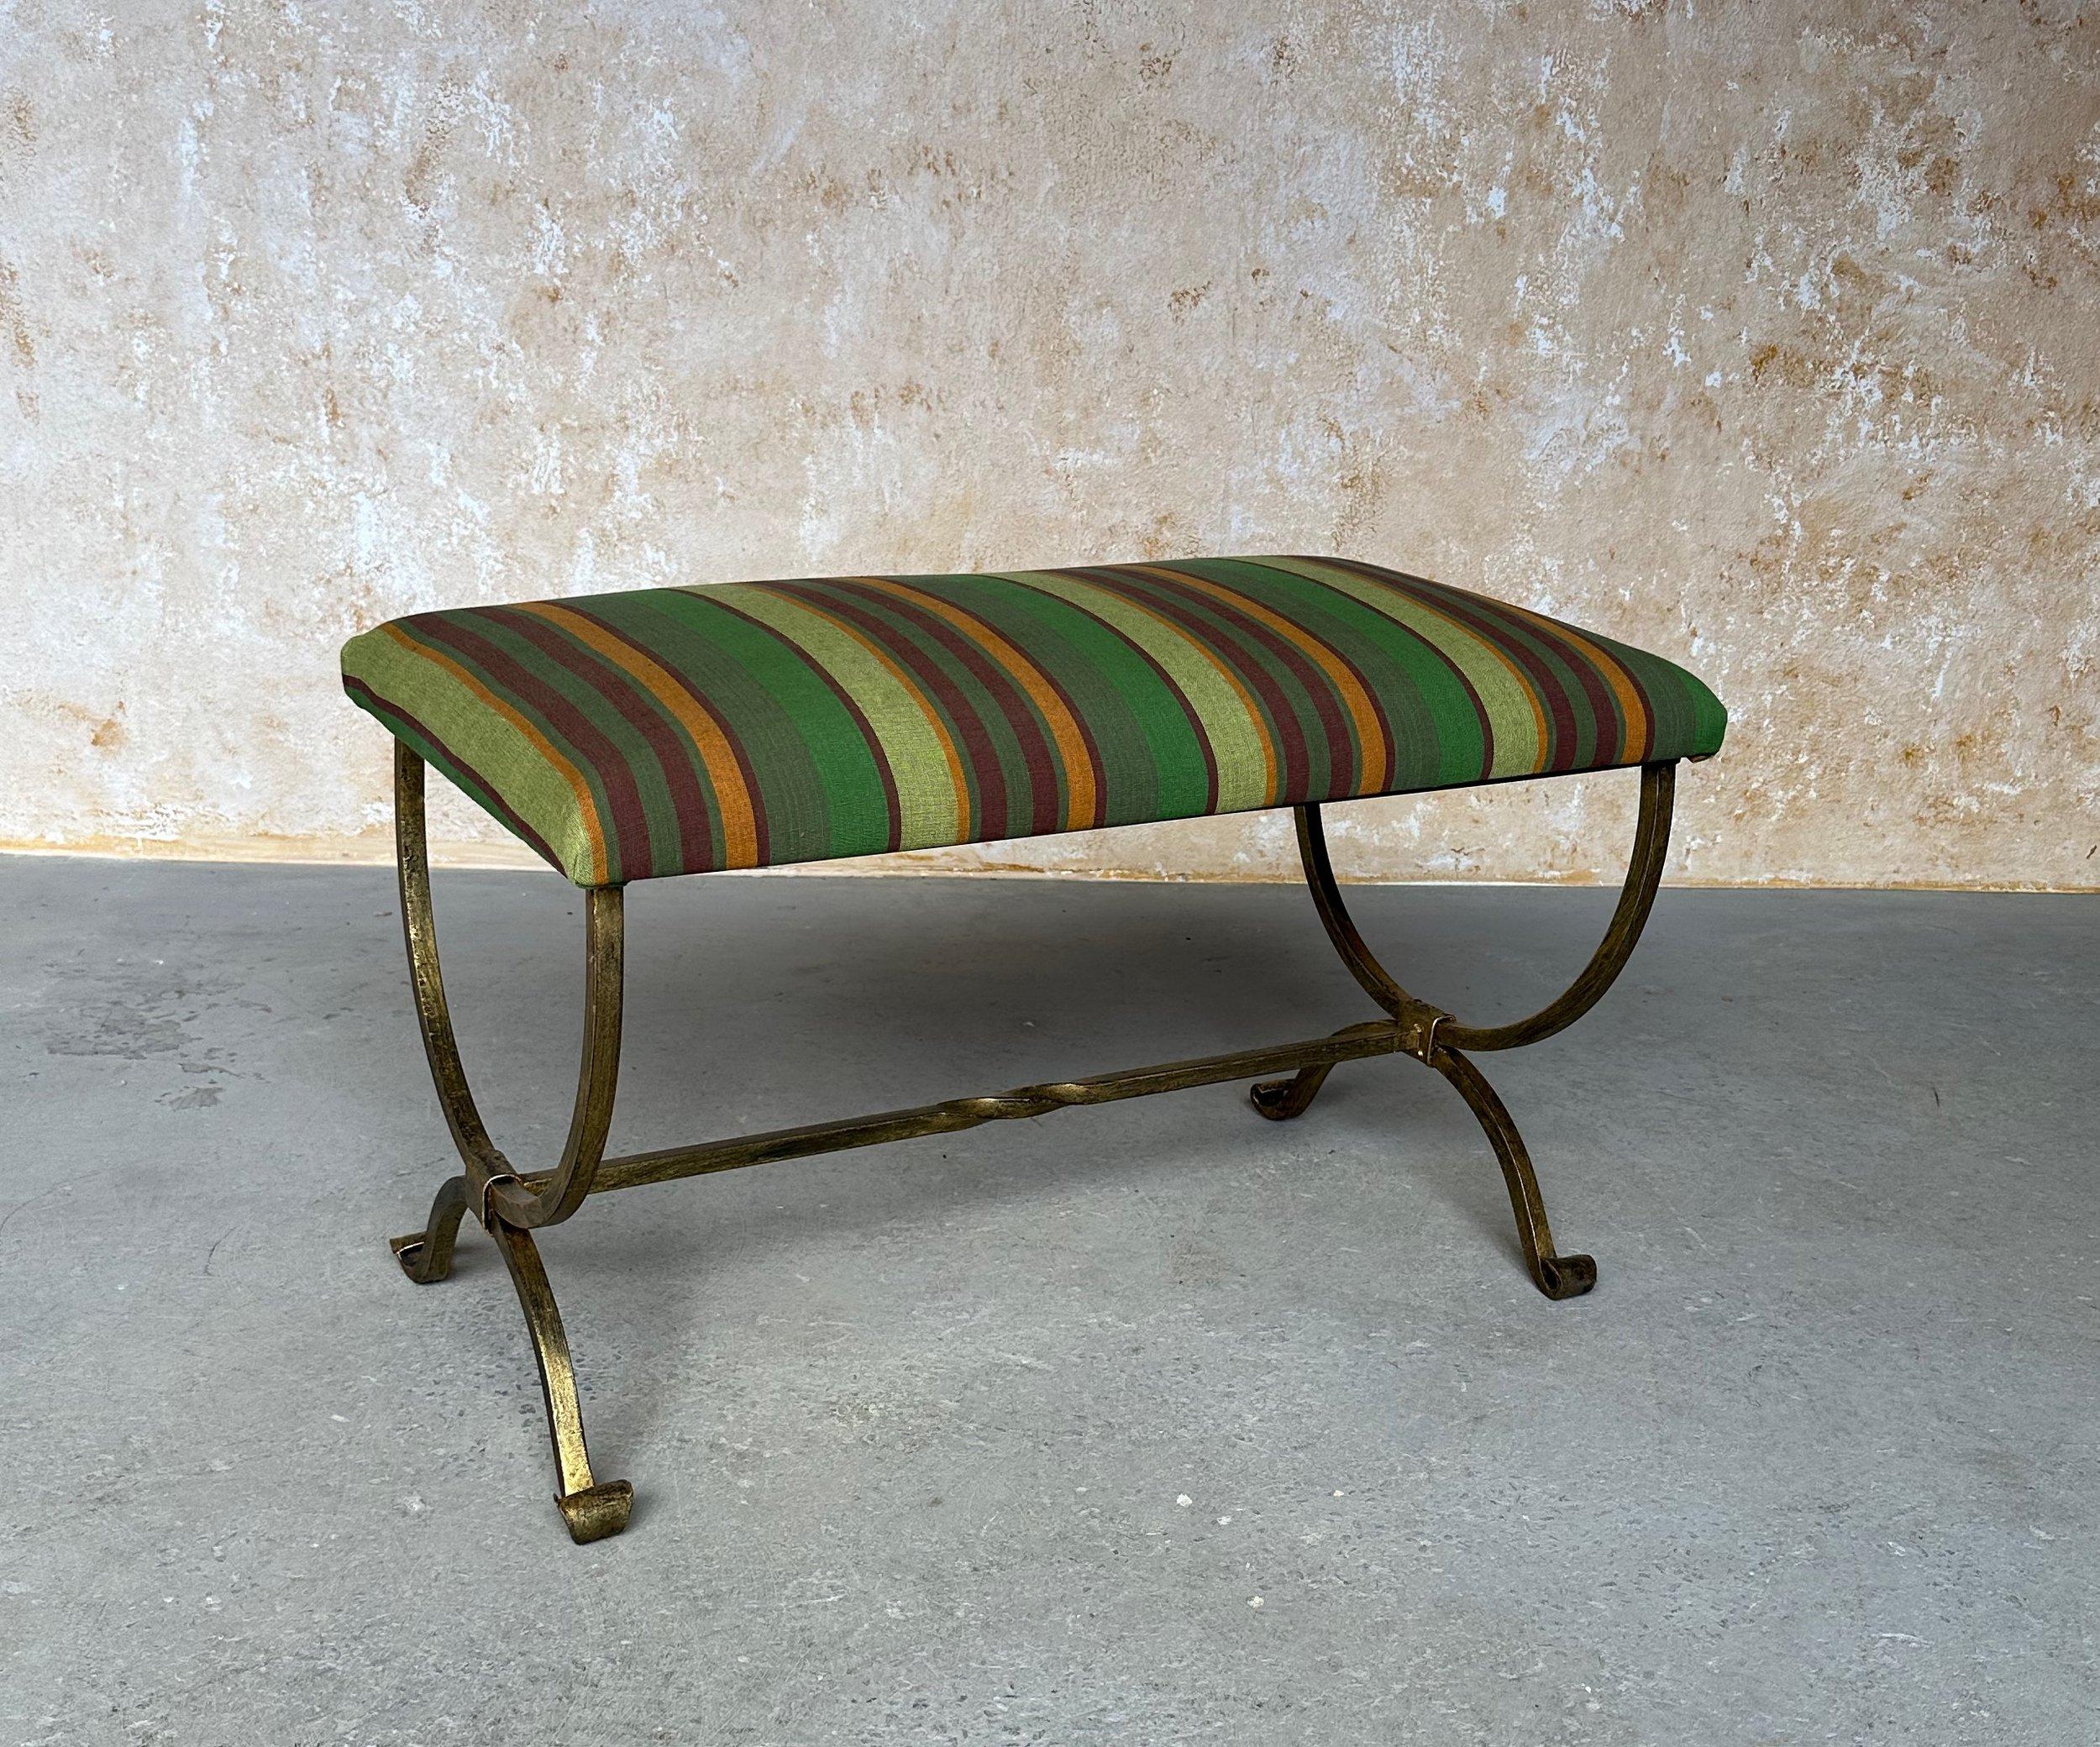 This beautiful Spanish gilt iron bench was recently made by skilled European artisans and features gracefully scrolled legs and a stretcher with a decorative center twist. The hand forged iron base has a rich but subtle gold patinated finish that